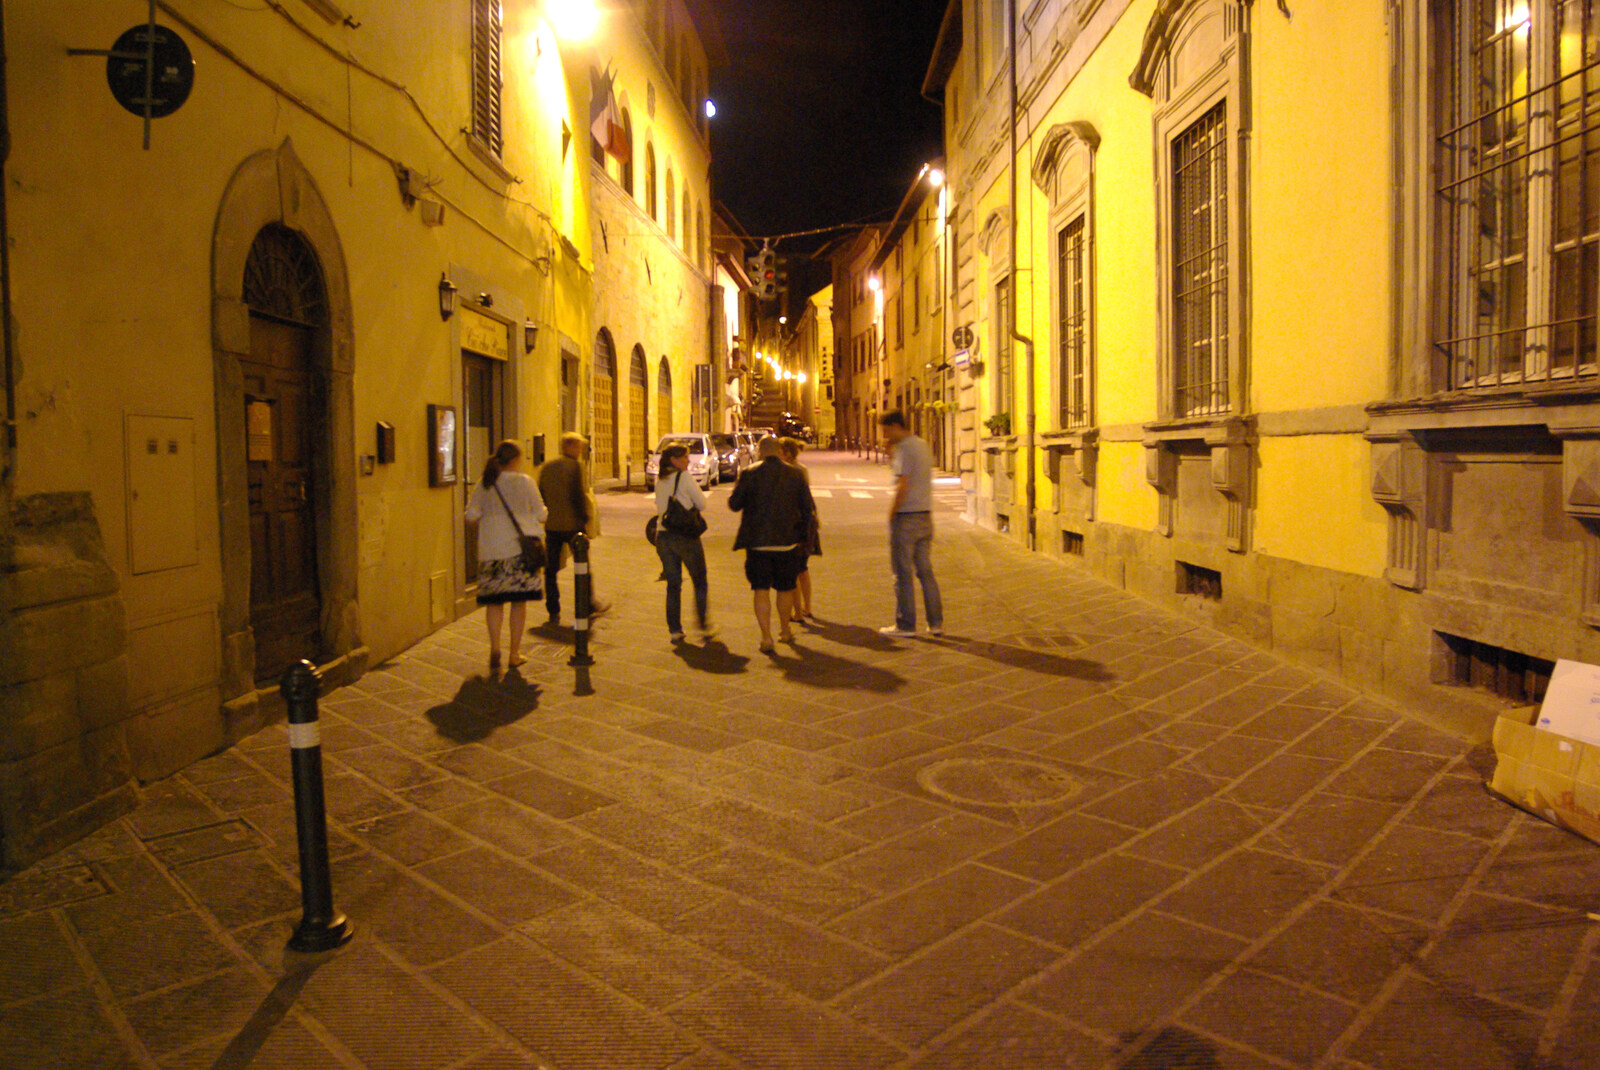 Tenuta Il Palazzo in Arezzo, Tuscany, Italy - 22nd July 2008: Walking through the old town of Arezzo